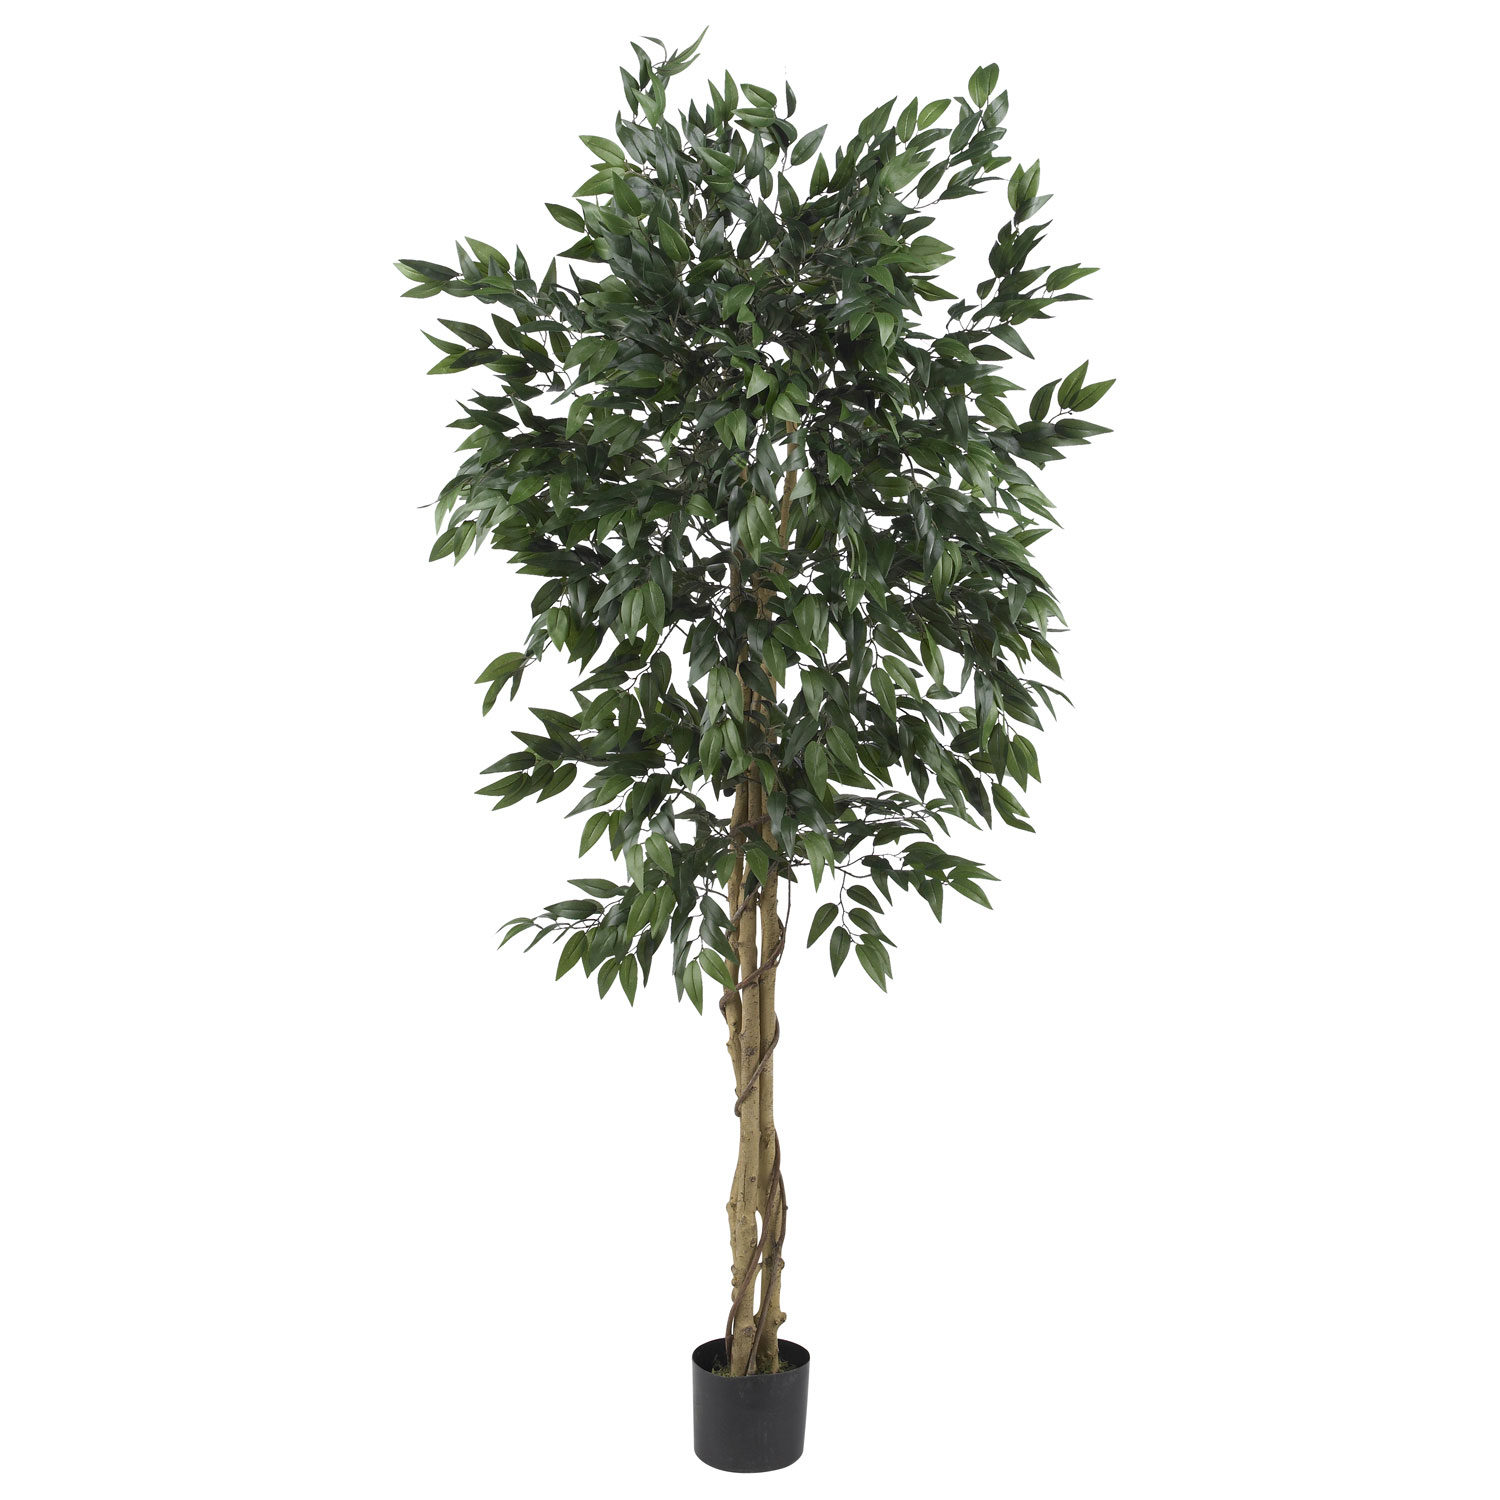 5 Foot Smilax Tree: Potted